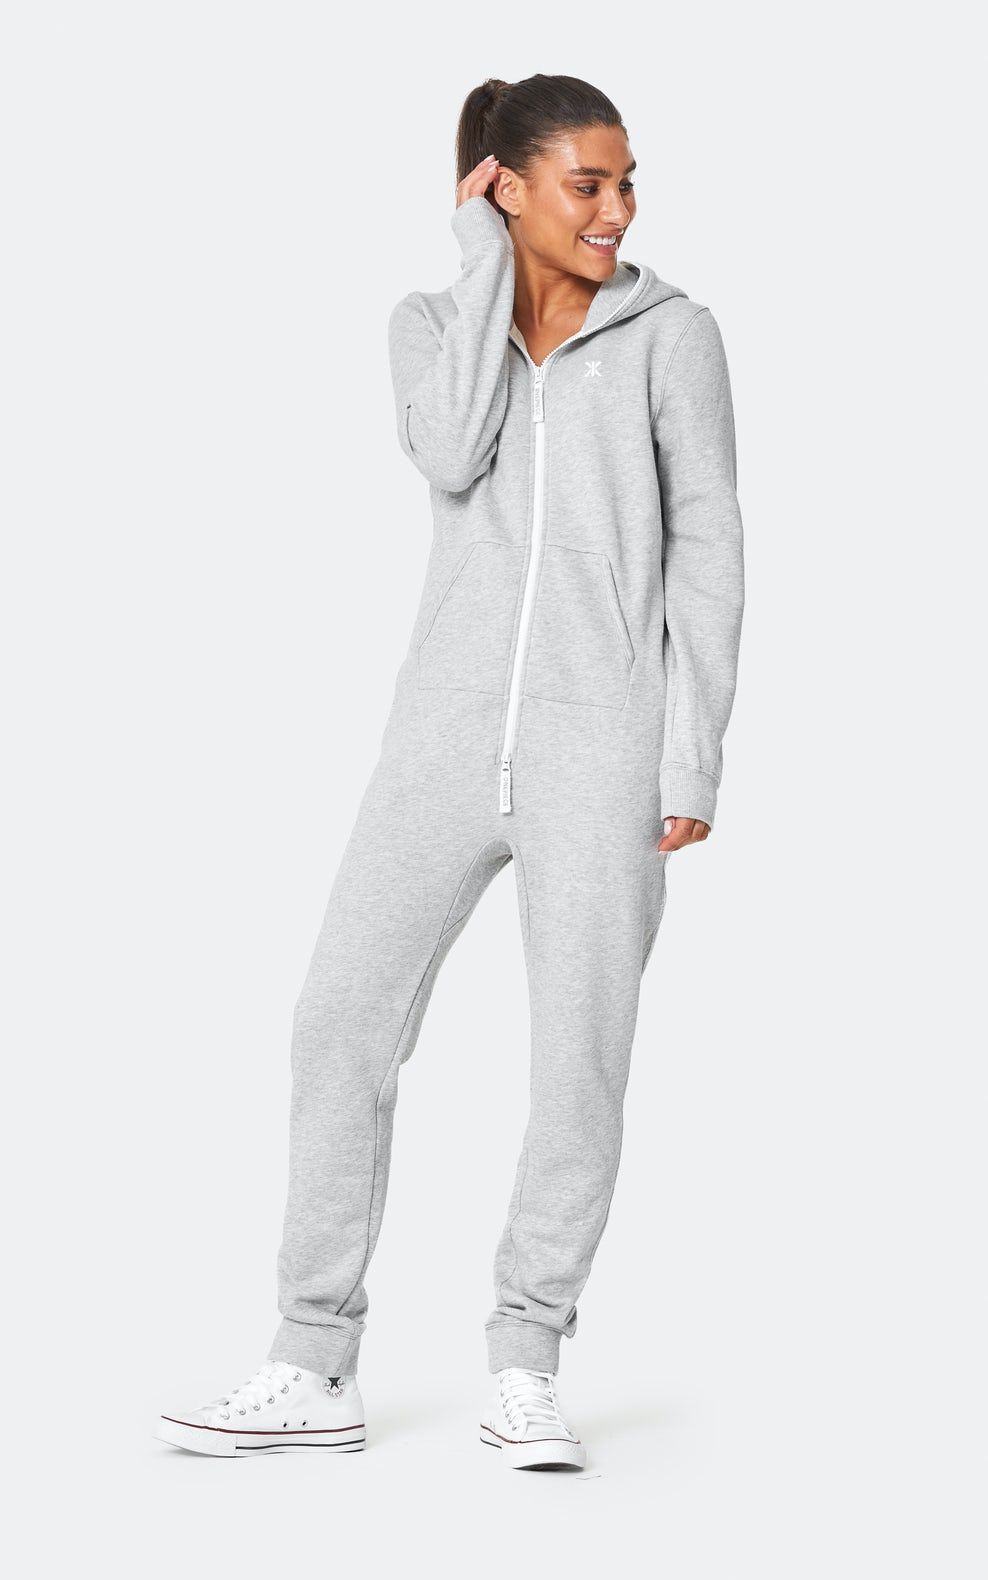 Best adult onesies to keep you warm and cozy this winter